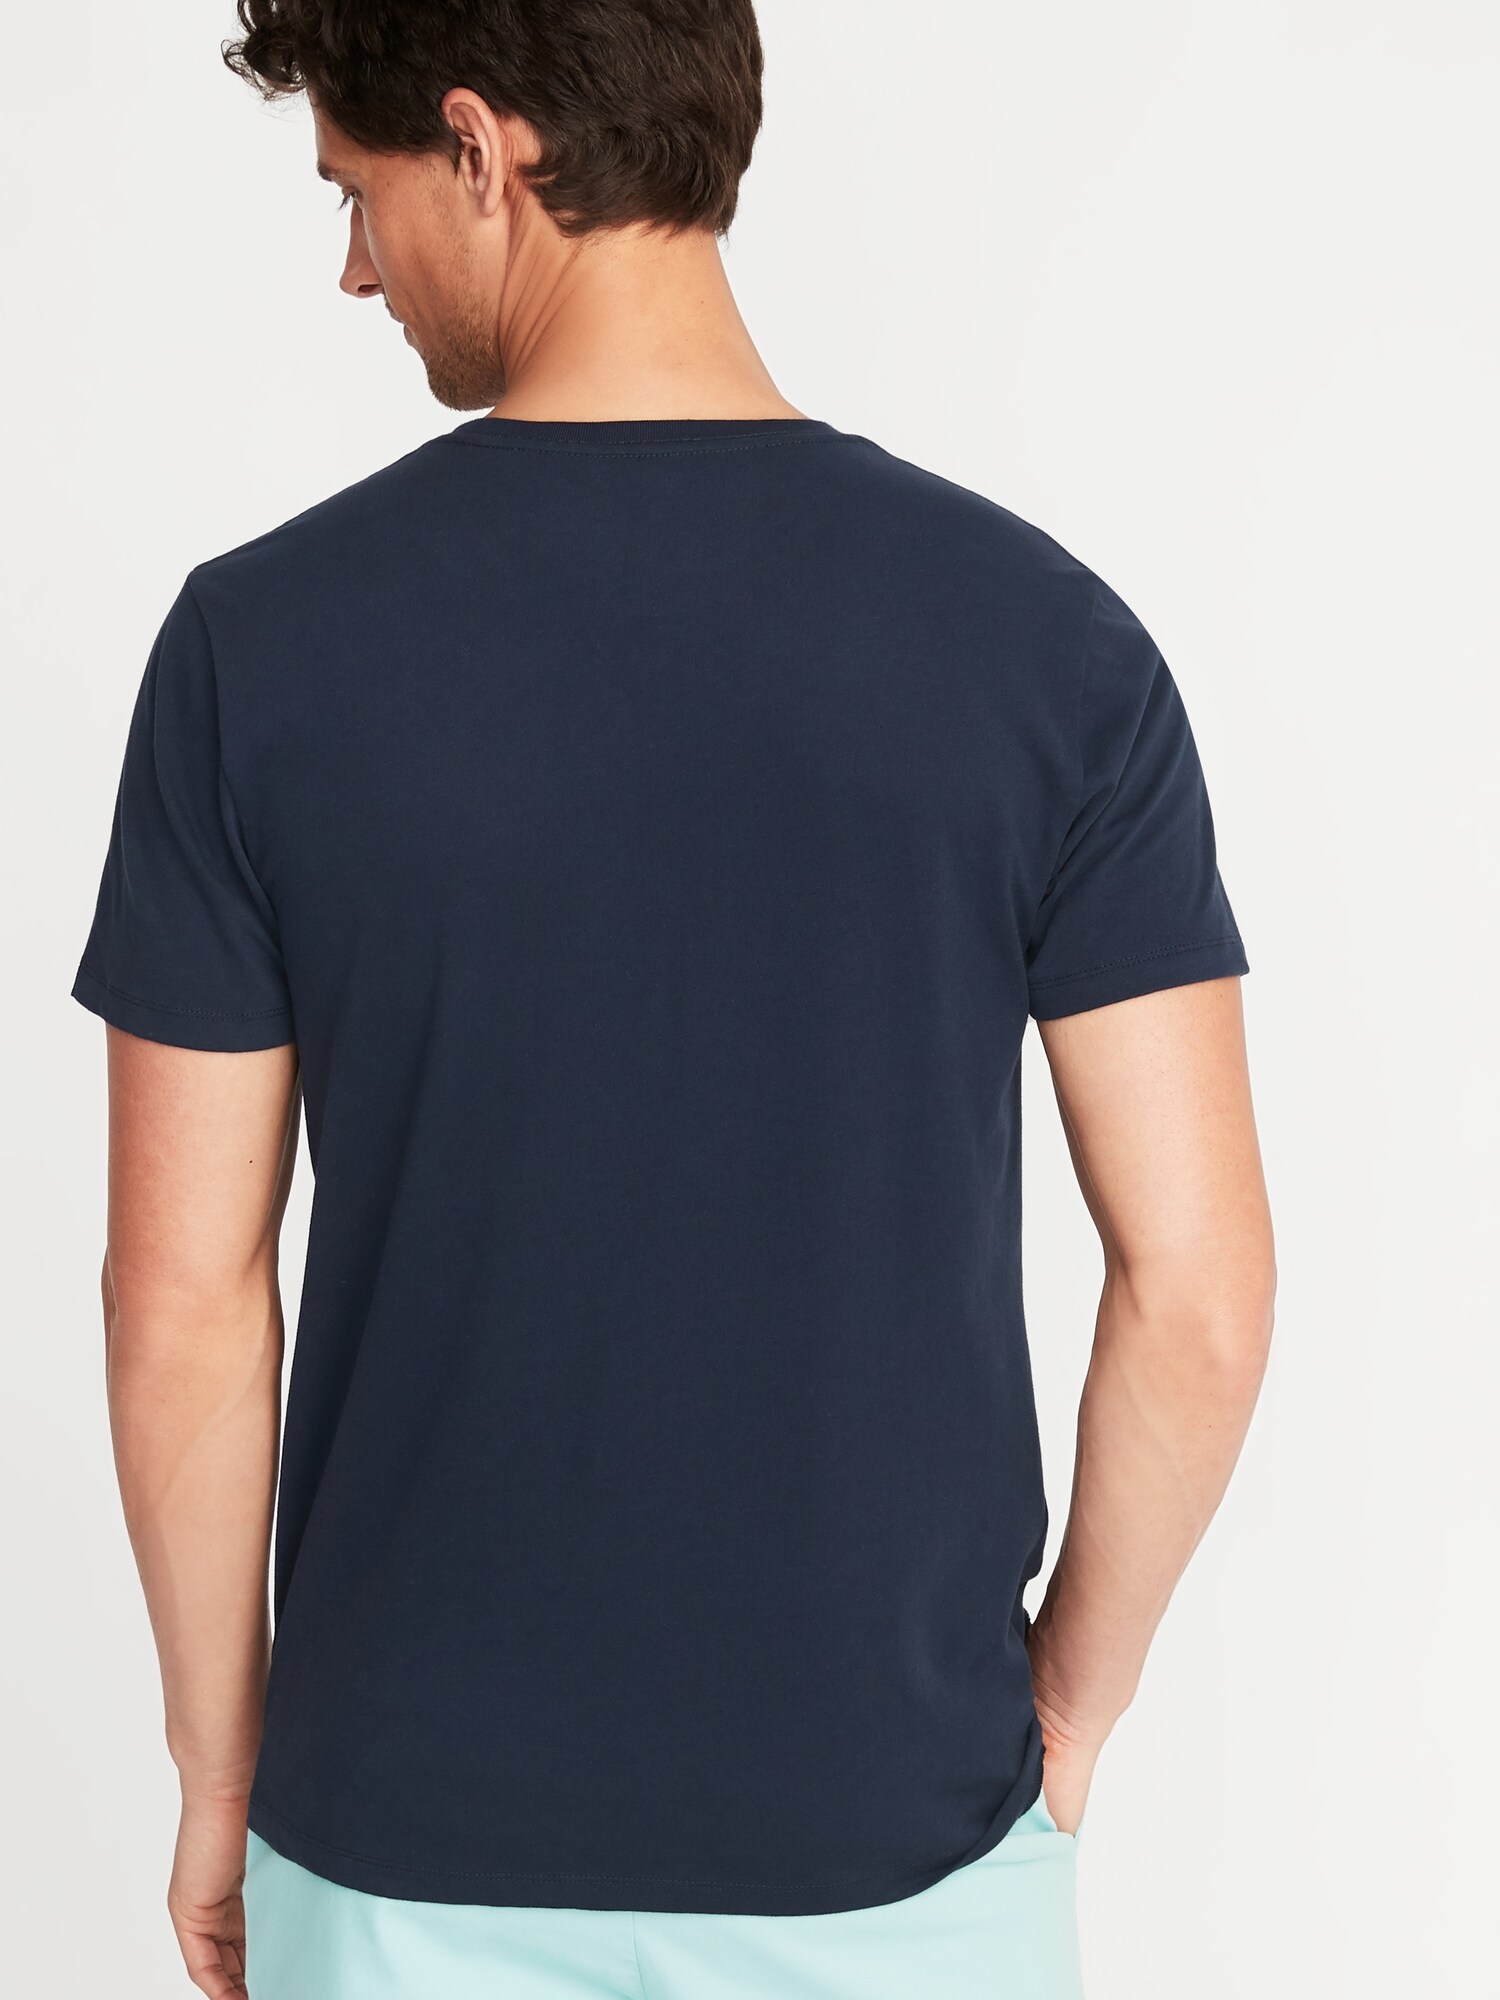 Soft-Washed Embroidered-Graphic Pocket Tee for Men | Old Navy